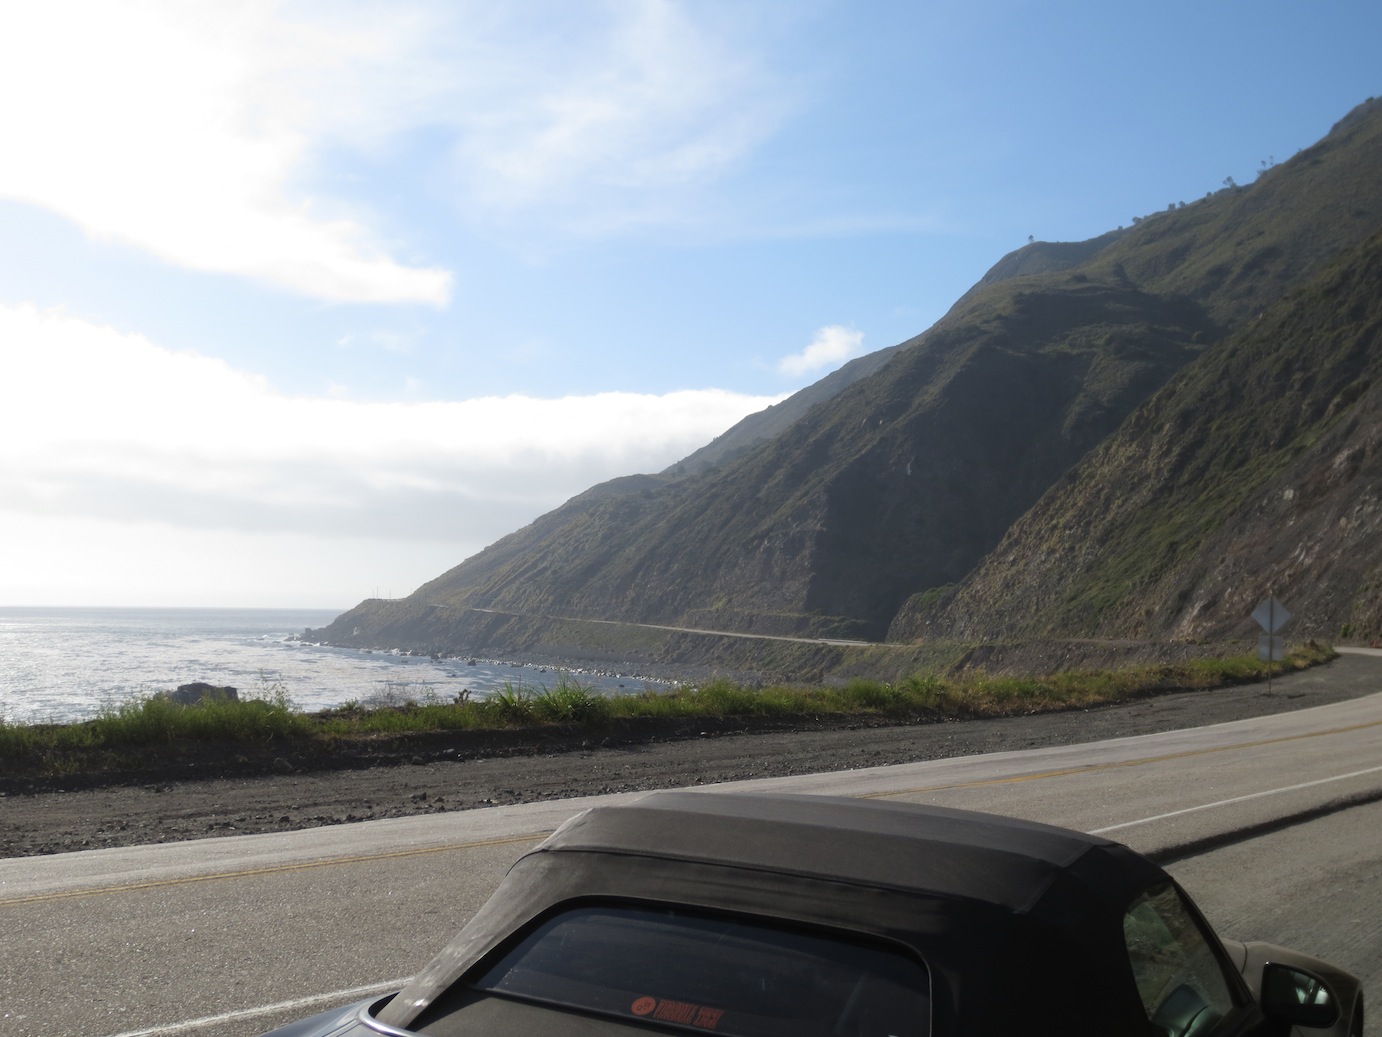 Over the top of the S2000 shot while pulled over on the PCH